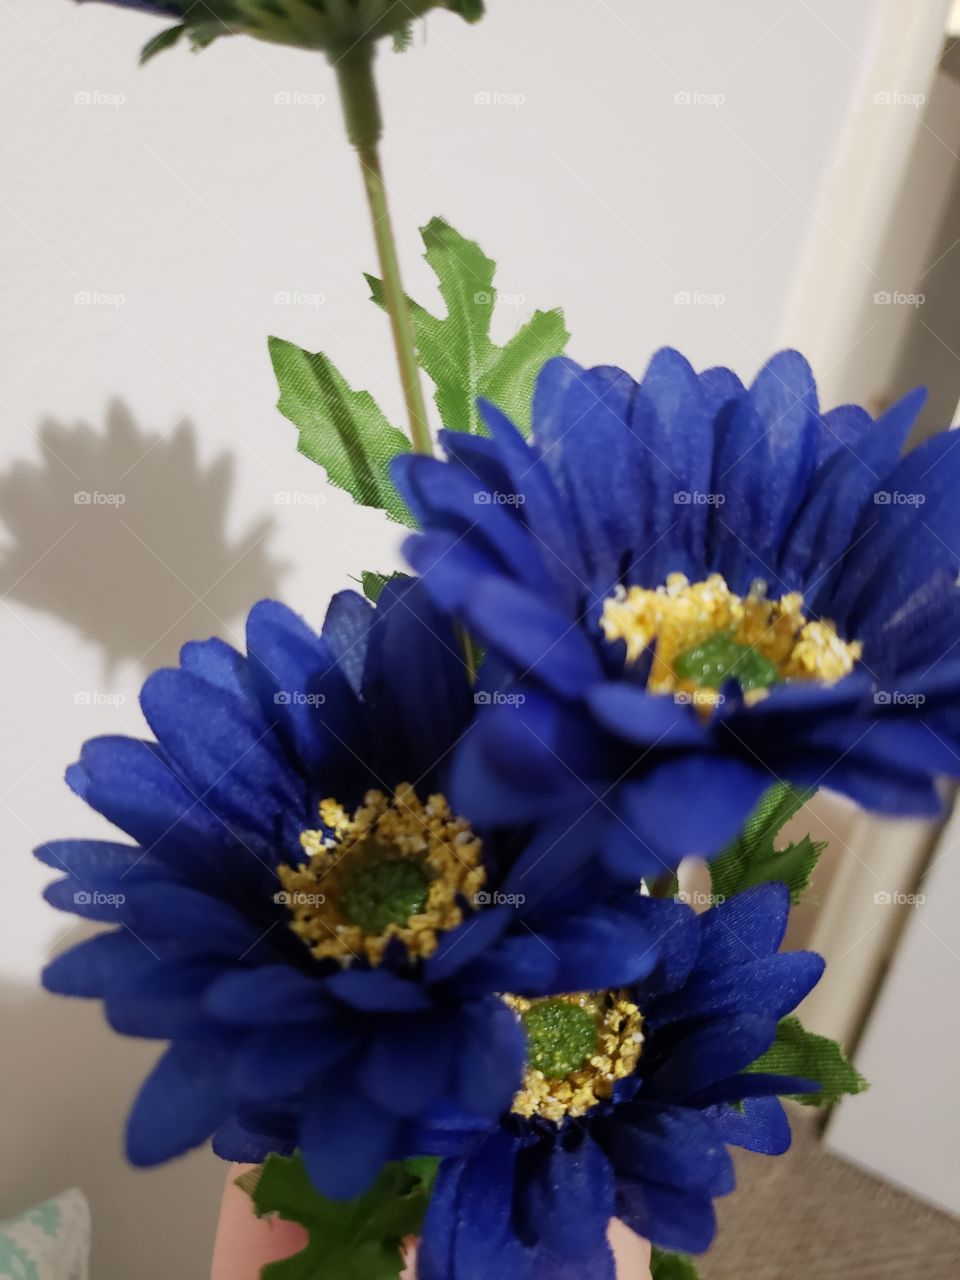 blue and yellow Daisy flowers, pretty, aroma, smells good, perfume, color, growth.